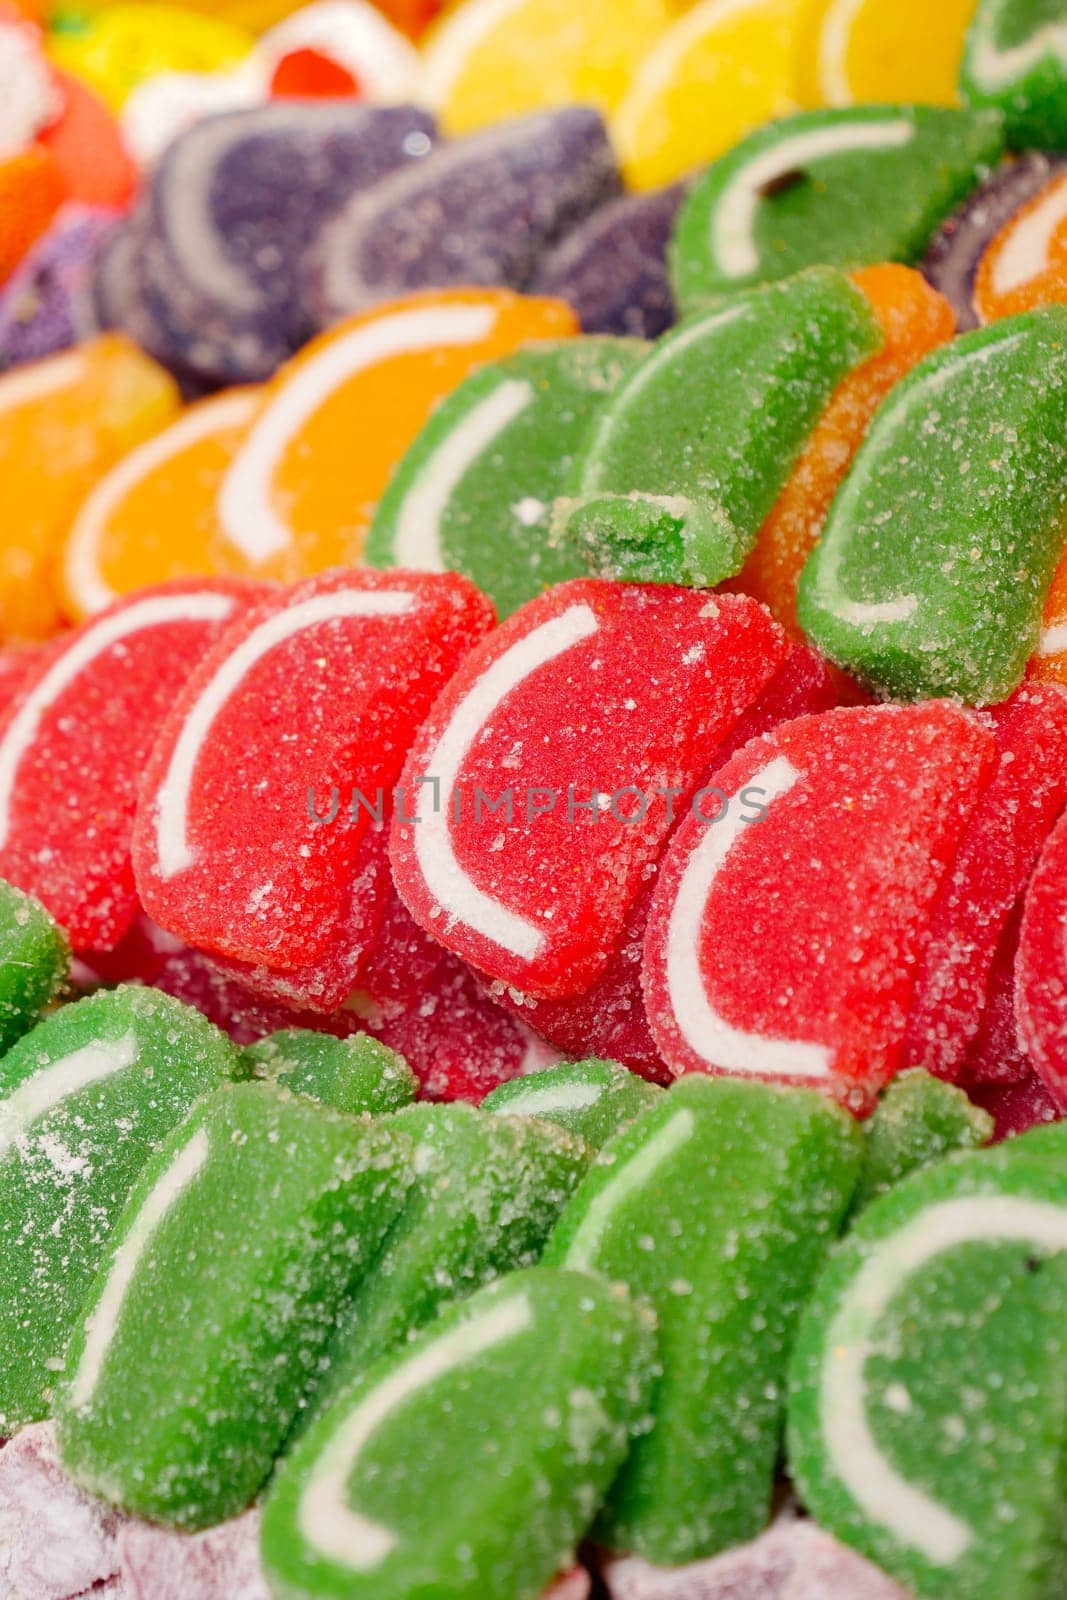 sugar coated jelly beans in the form of colored sliced fruit by towfiq007